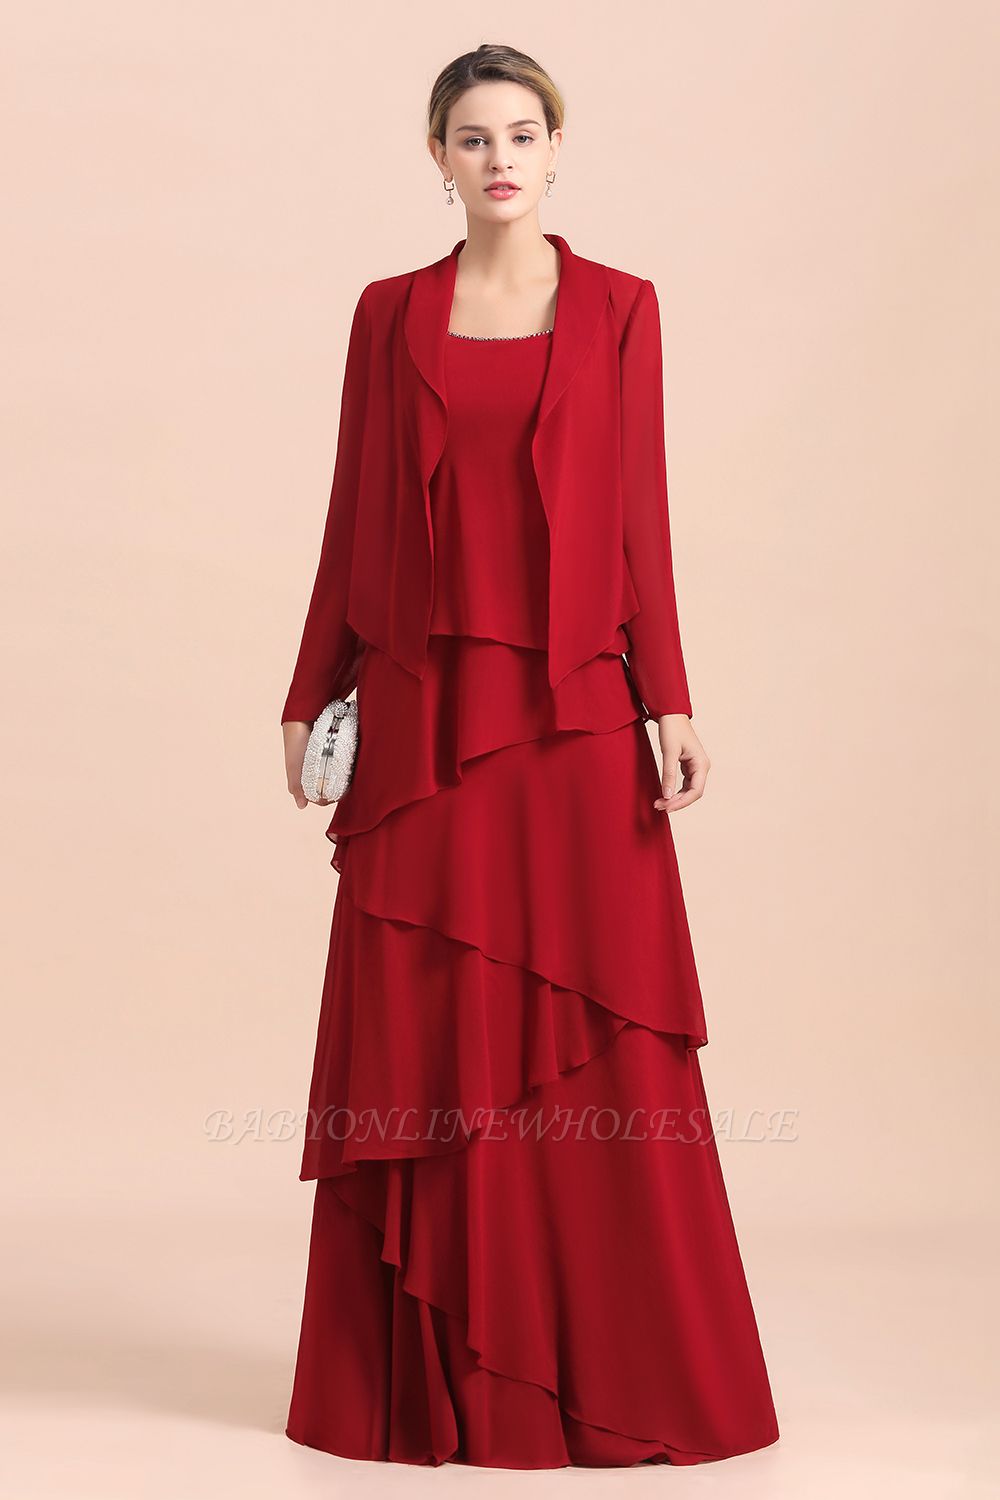 Ruby Chiffon Two-pieces Ruffles Long sleeves Mother of the Bride Dress